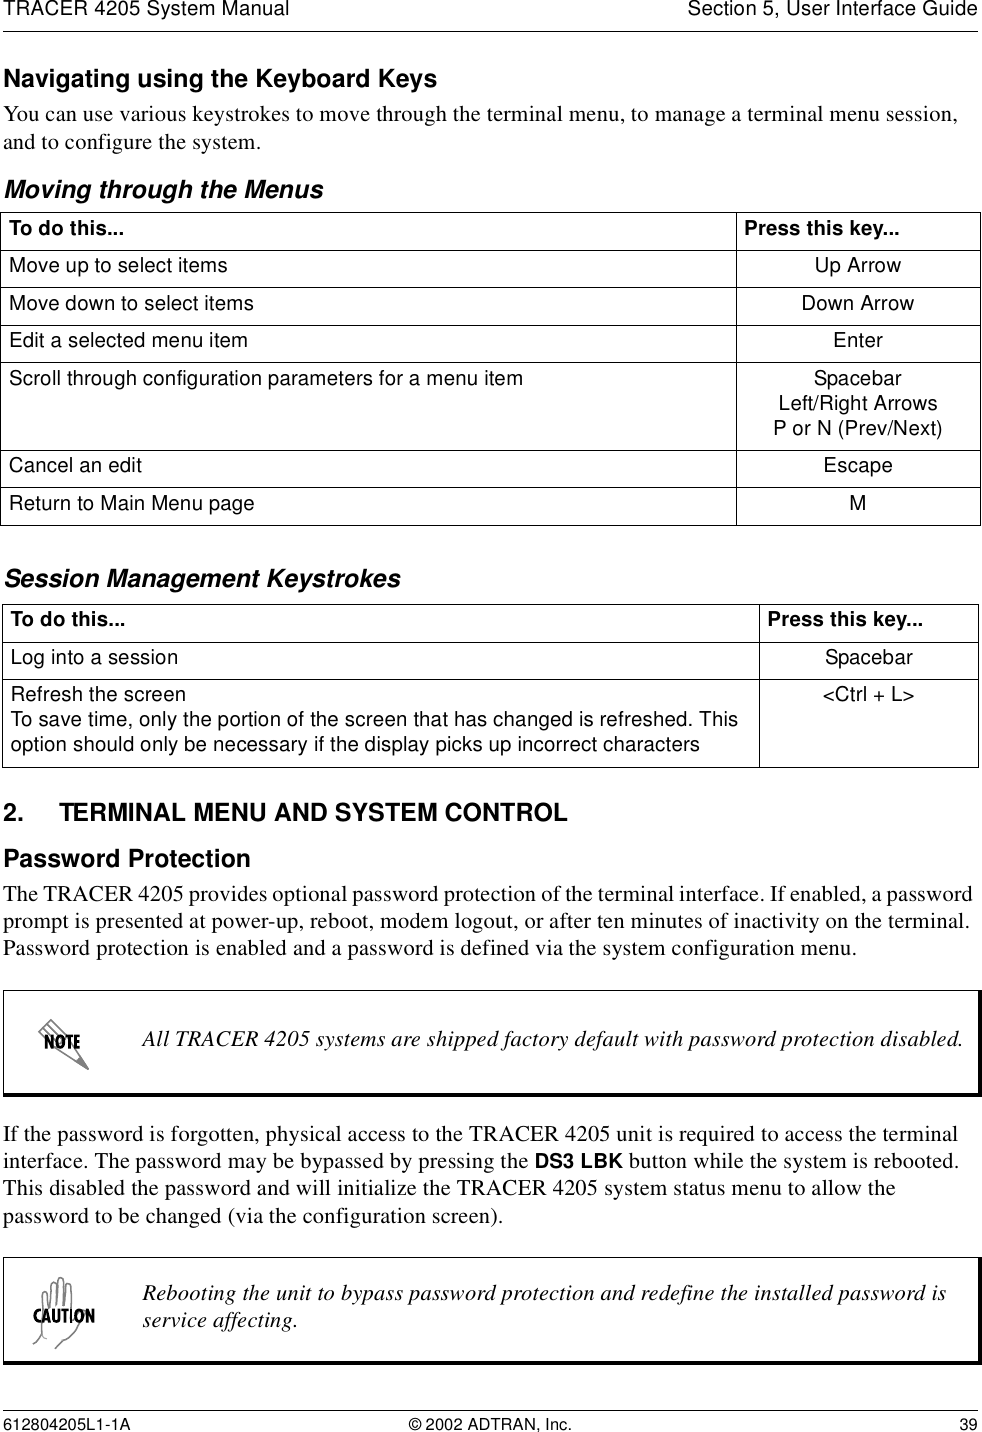 TRACER 4205 System Manual Section 5, User Interface Guide612804205L1-1A © 2002 ADTRAN, Inc. 39Navigating using the Keyboard KeysYou can use various keystrokes to move through the terminal menu, to manage a terminal menu session, and to configure the system.Moving through the MenusSession Management Keystrokes2. TERMINAL MENU AND SYSTEM CONTROLPassword ProtectionThe TRACER 4205 provides optional password protection of the terminal interface. If enabled, a password prompt is presented at power-up, reboot, modem logout, or after ten minutes of inactivity on the terminal. Password protection is enabled and a password is defined via the system configuration menu.If the password is forgotten, physical access to the TRACER 4205 unit is required to access the terminal interface. The password may be bypassed by pressing the DS3 LBK button while the system is rebooted. This disabled the password and will initialize the TRACER 4205 system status menu to allow the password to be changed (via the configuration screen).To do this... Press this key...Move up to select items Up ArrowMove down to select items Down ArrowEdit a selected menu item EnterScroll through configuration parameters for a menu item SpacebarLeft/Right ArrowsP or N (Prev/Next)Cancel an edit EscapeReturn to Main Menu page MTo do this... Press this key...Log into a session SpacebarRefresh the screenTo save time, only the portion of the screen that has changed is refreshed. This option should only be necessary if the display picks up incorrect characters&lt;Ctrl + L&gt;All TRACER 4205 systems are shipped factory default with password protection disabled.Rebooting the unit to bypass password protection and redefine the installed password is service affecting.